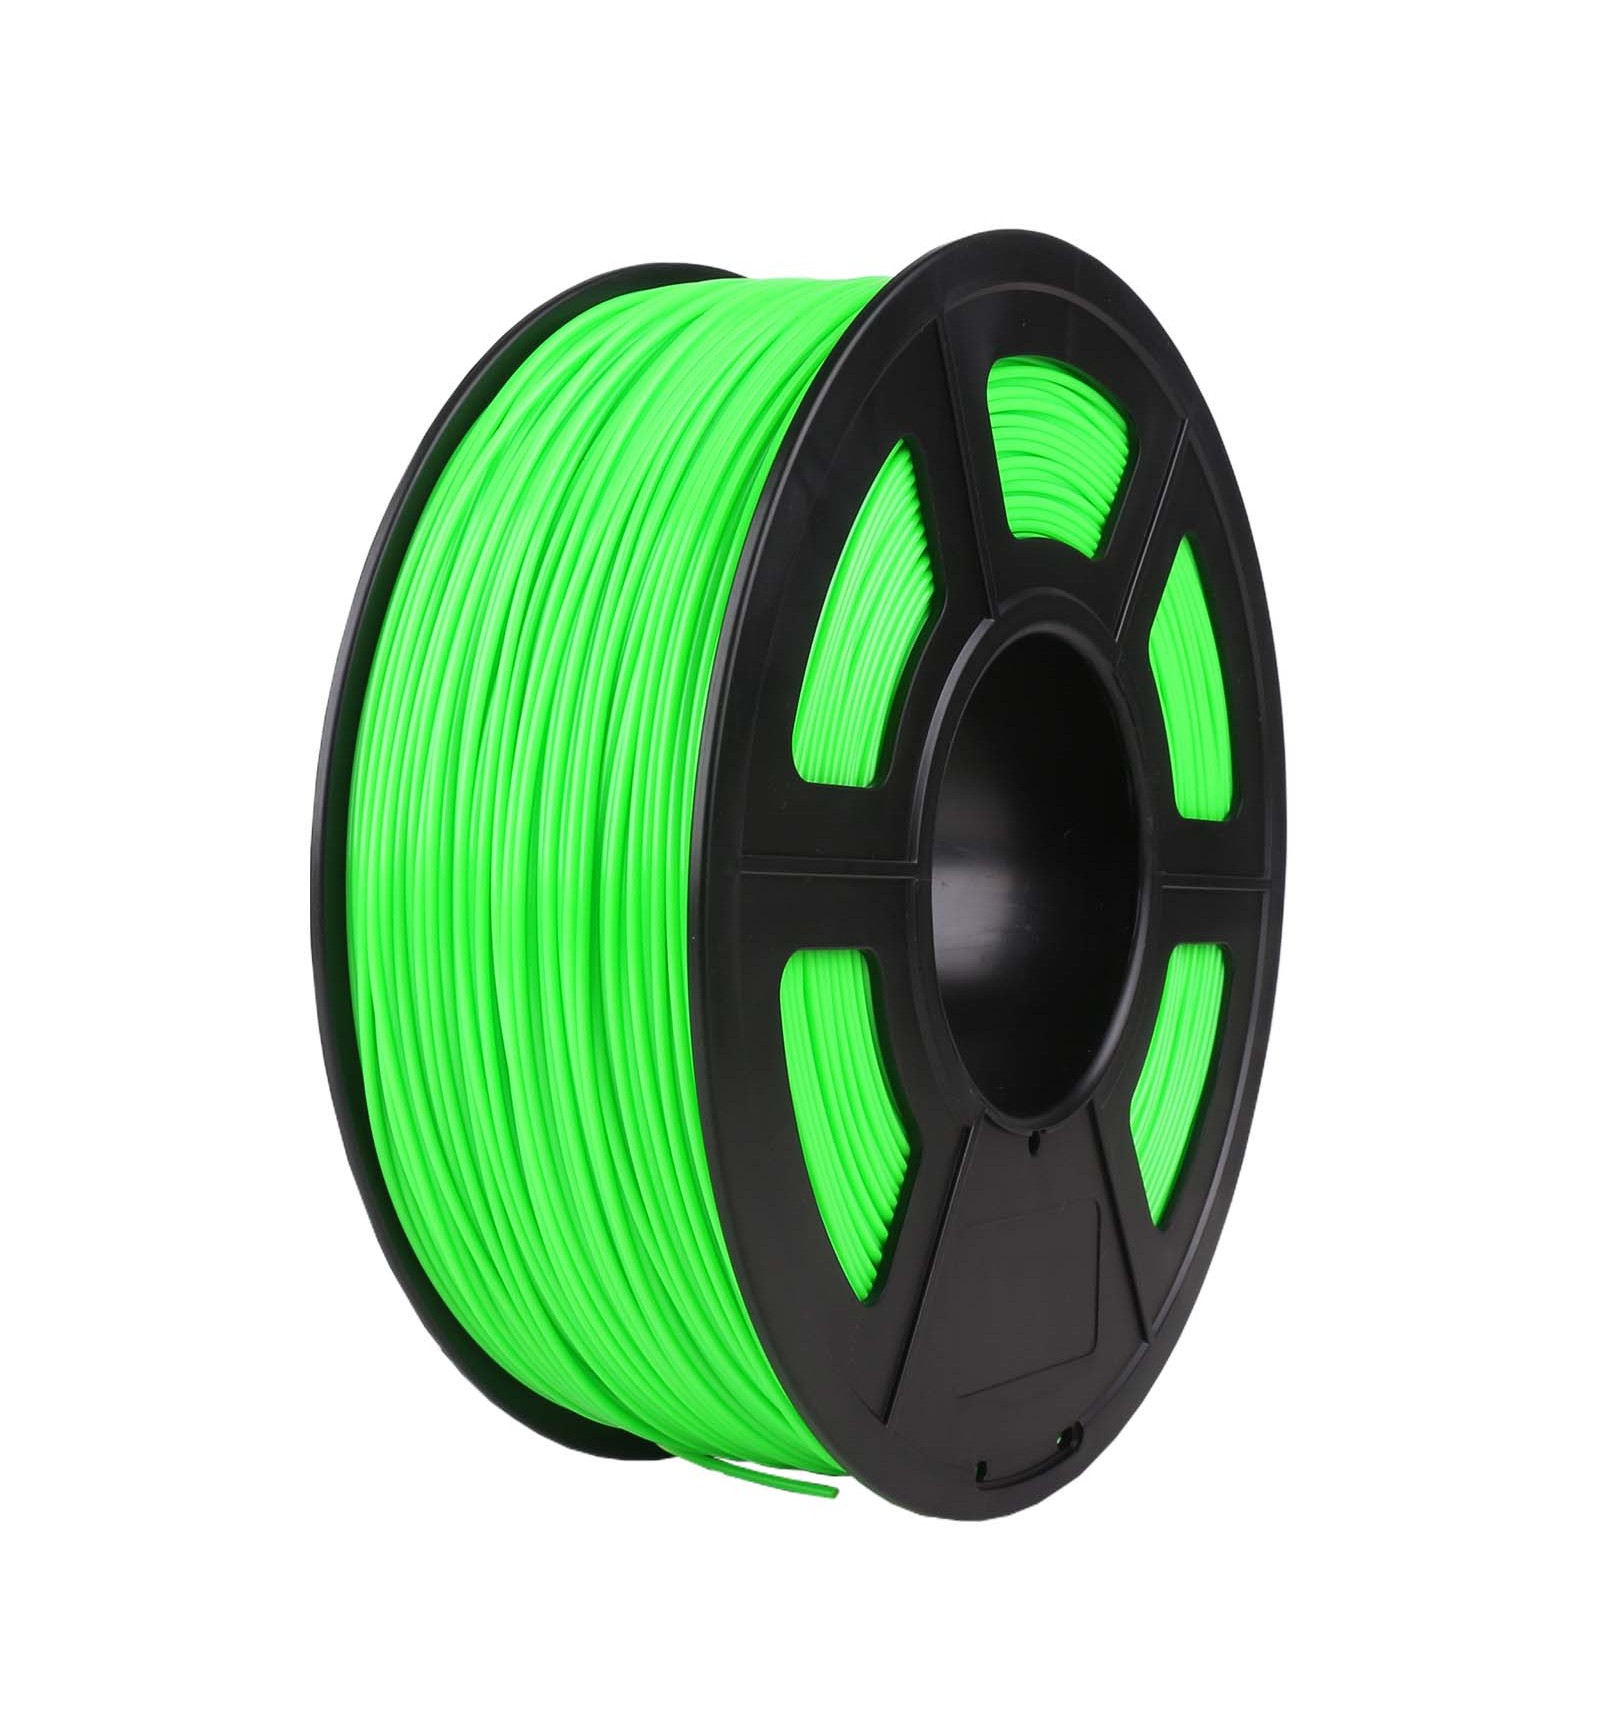 SUNLU ABS filament – General discussion, announcements and